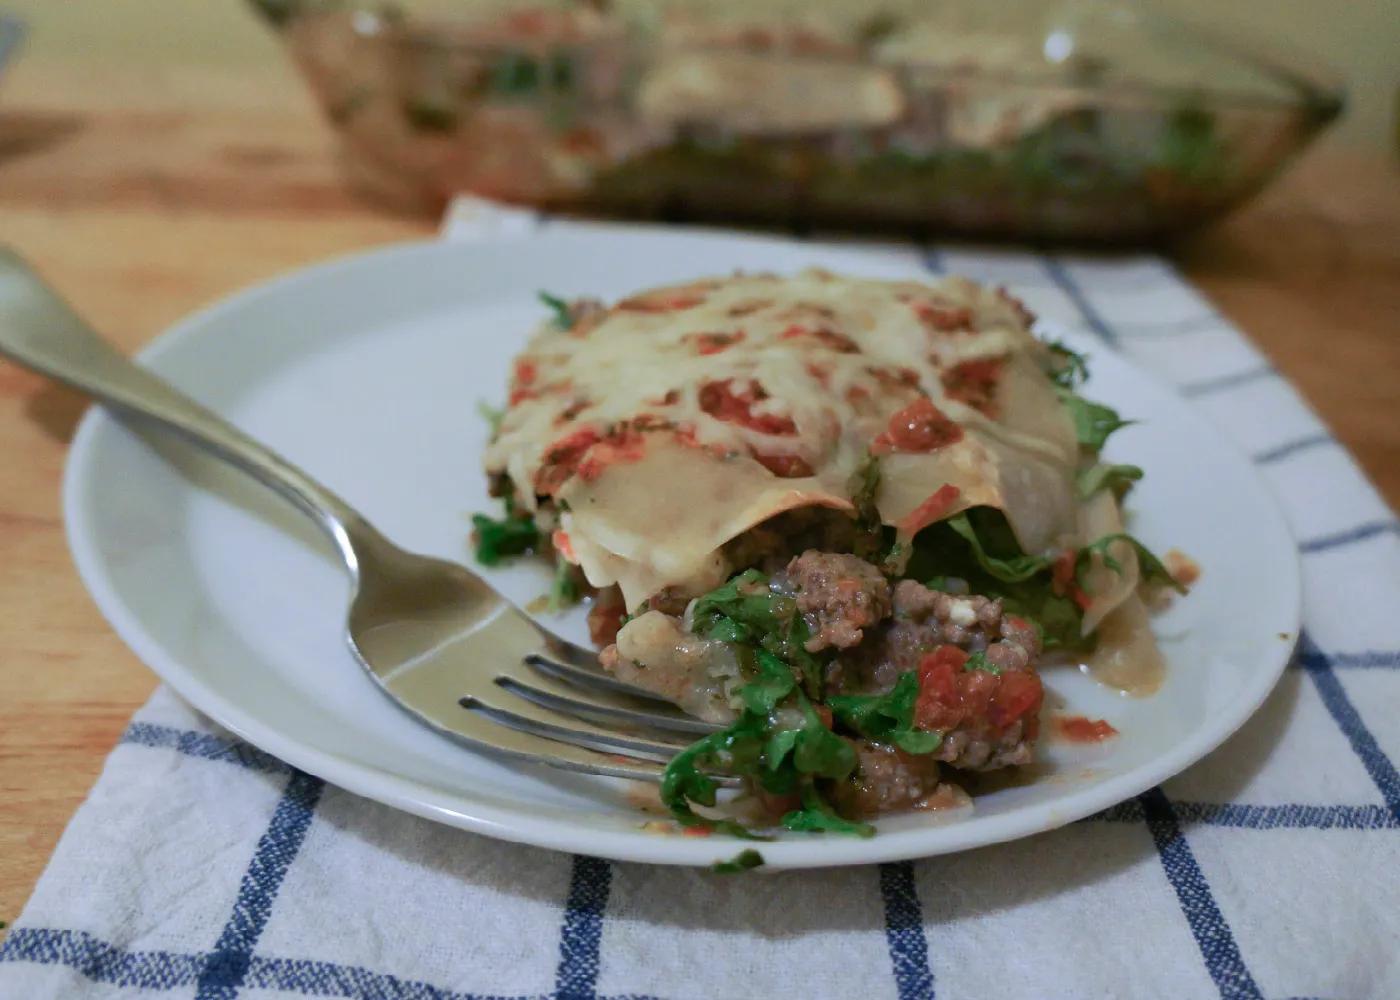 Weight Watchers Lasagna Recipe - Made Over Meal